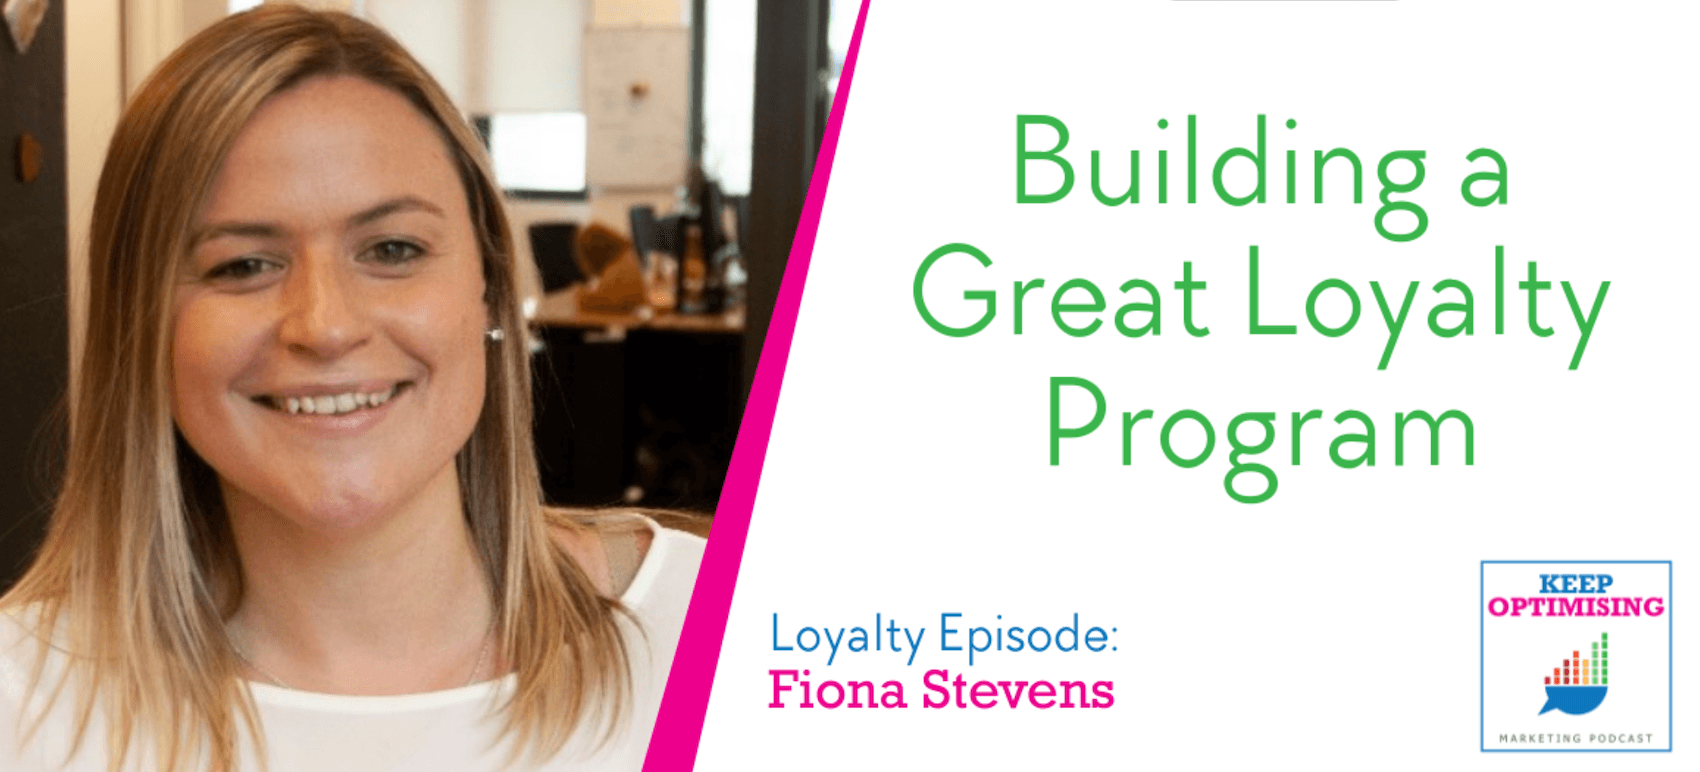 Building a great Loyalty Program with Fiona Stevens from LoyaltyLion